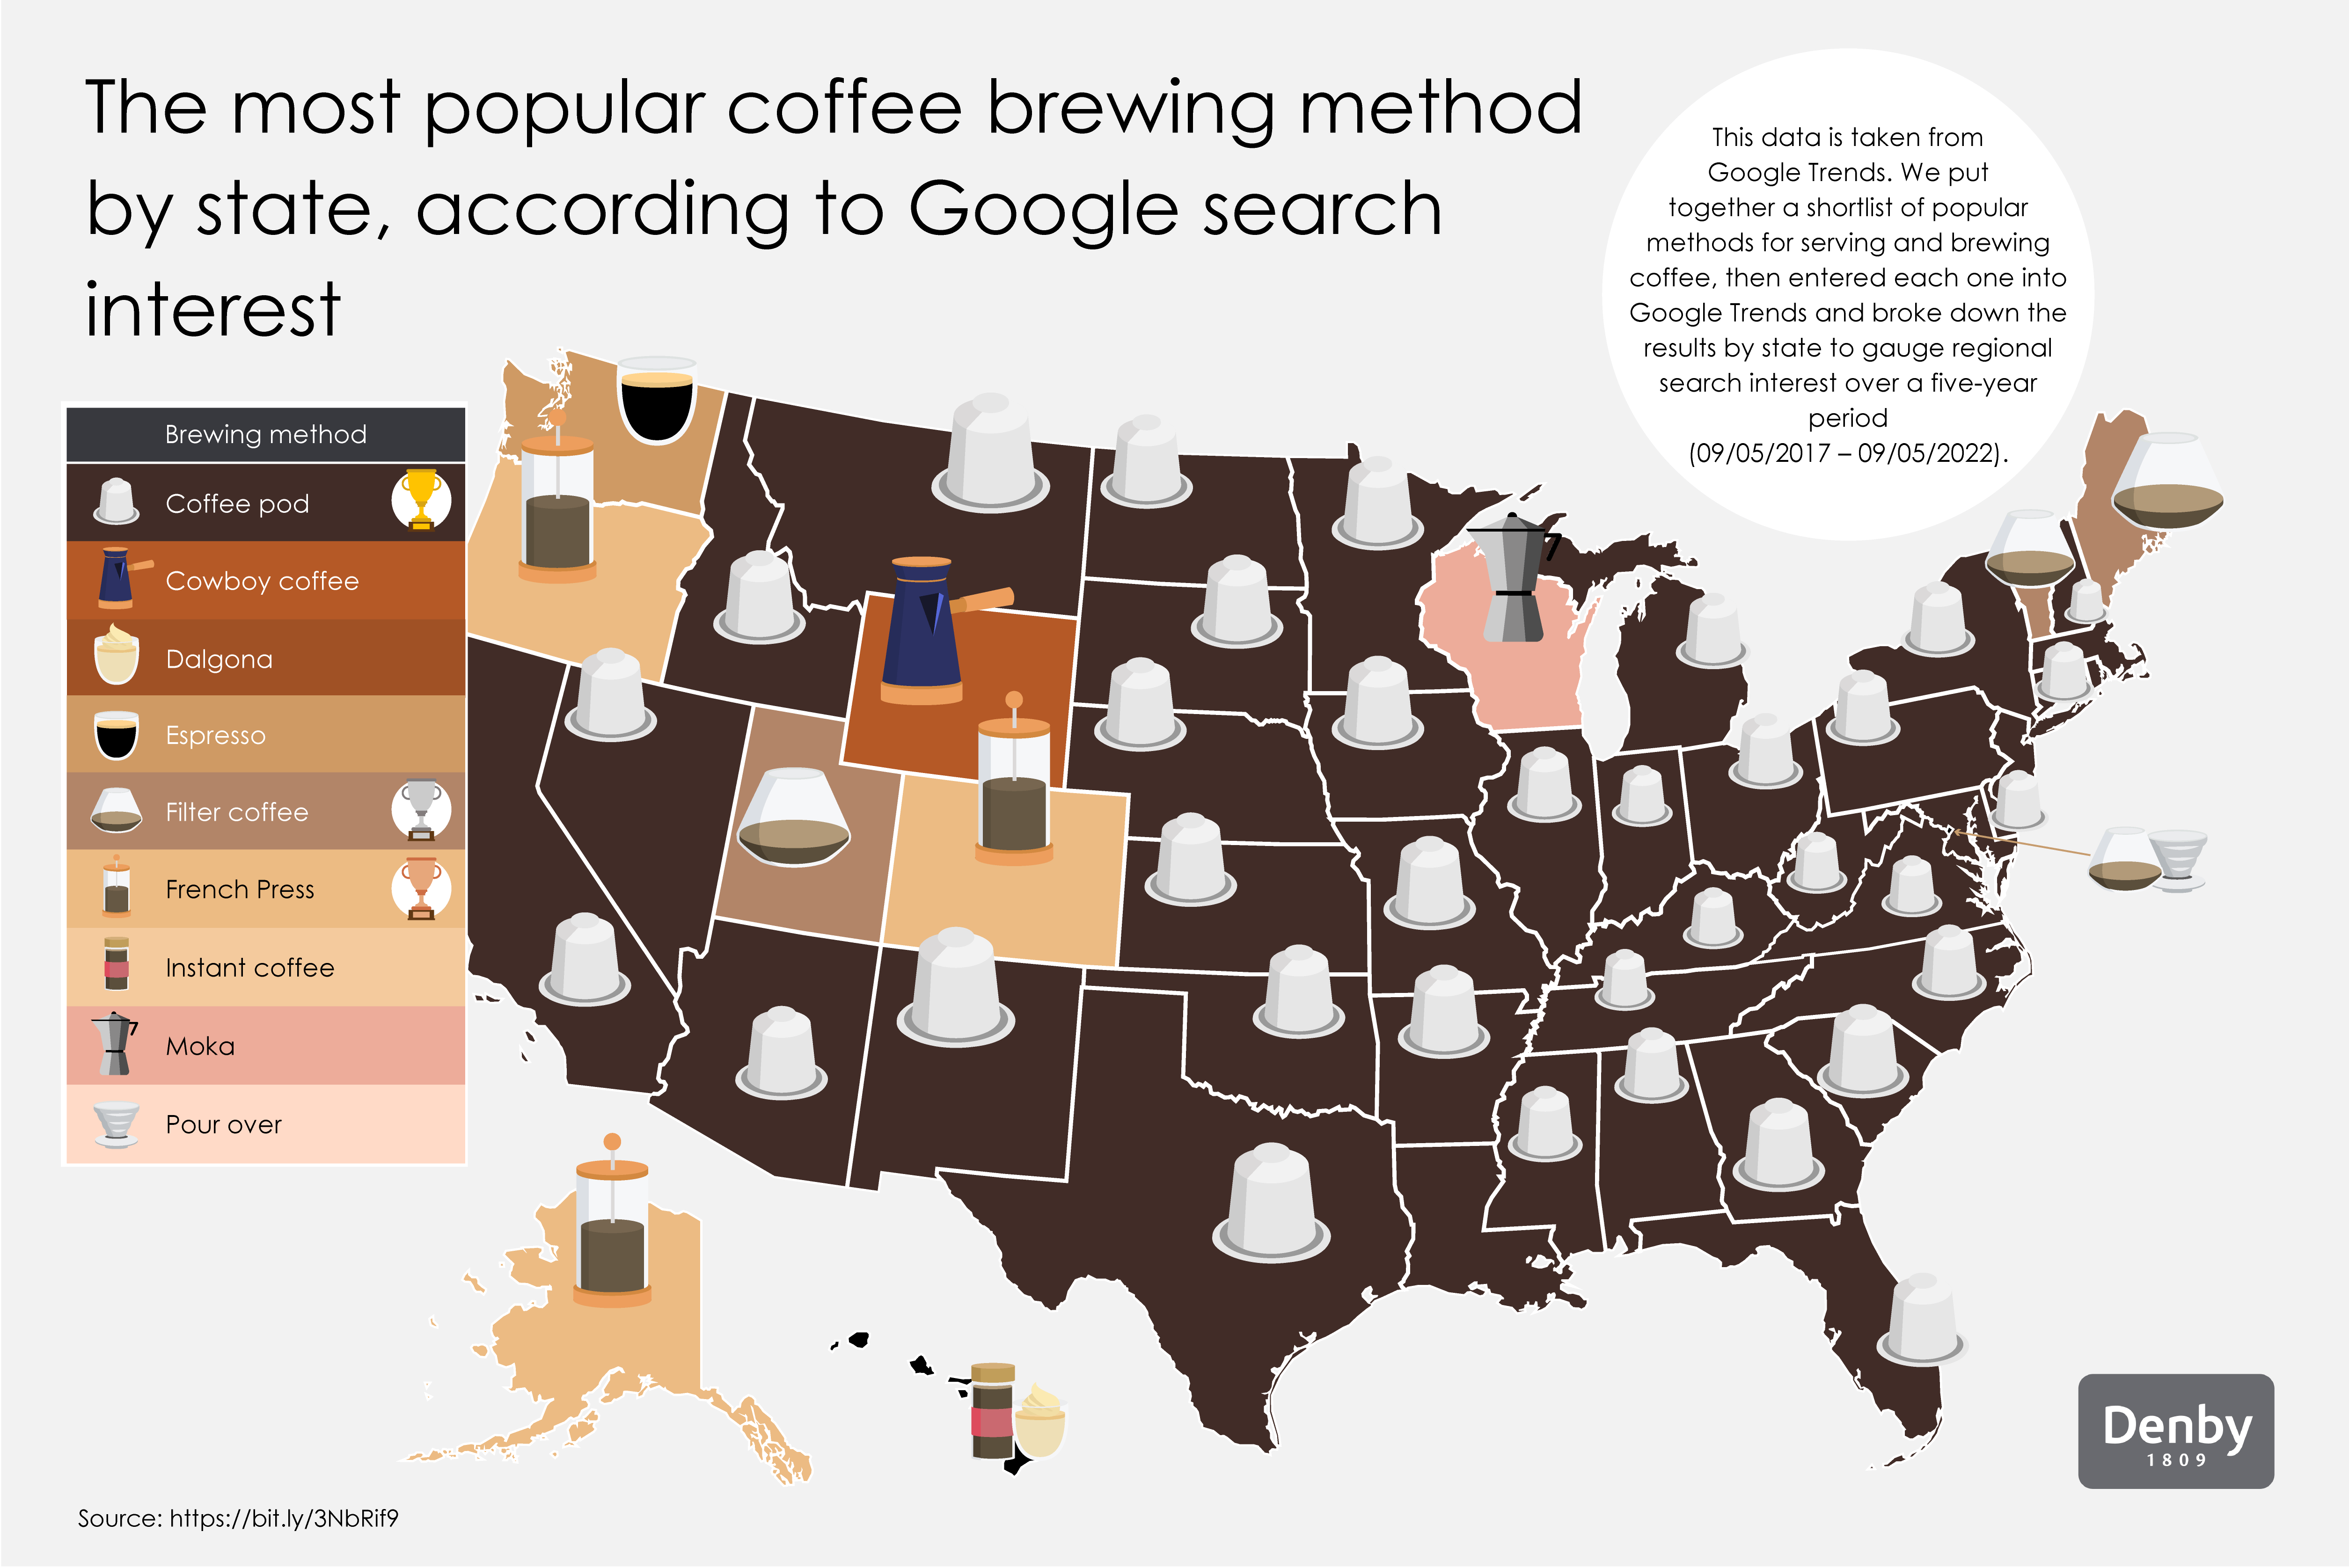 https://www.tasteofhome.com/wp-content/uploads/2022/11/Map-of-the-most-popular-coffee-brewing-method-in-every-state-%E2%80%93-Denby-US.png?fit=680%2C454